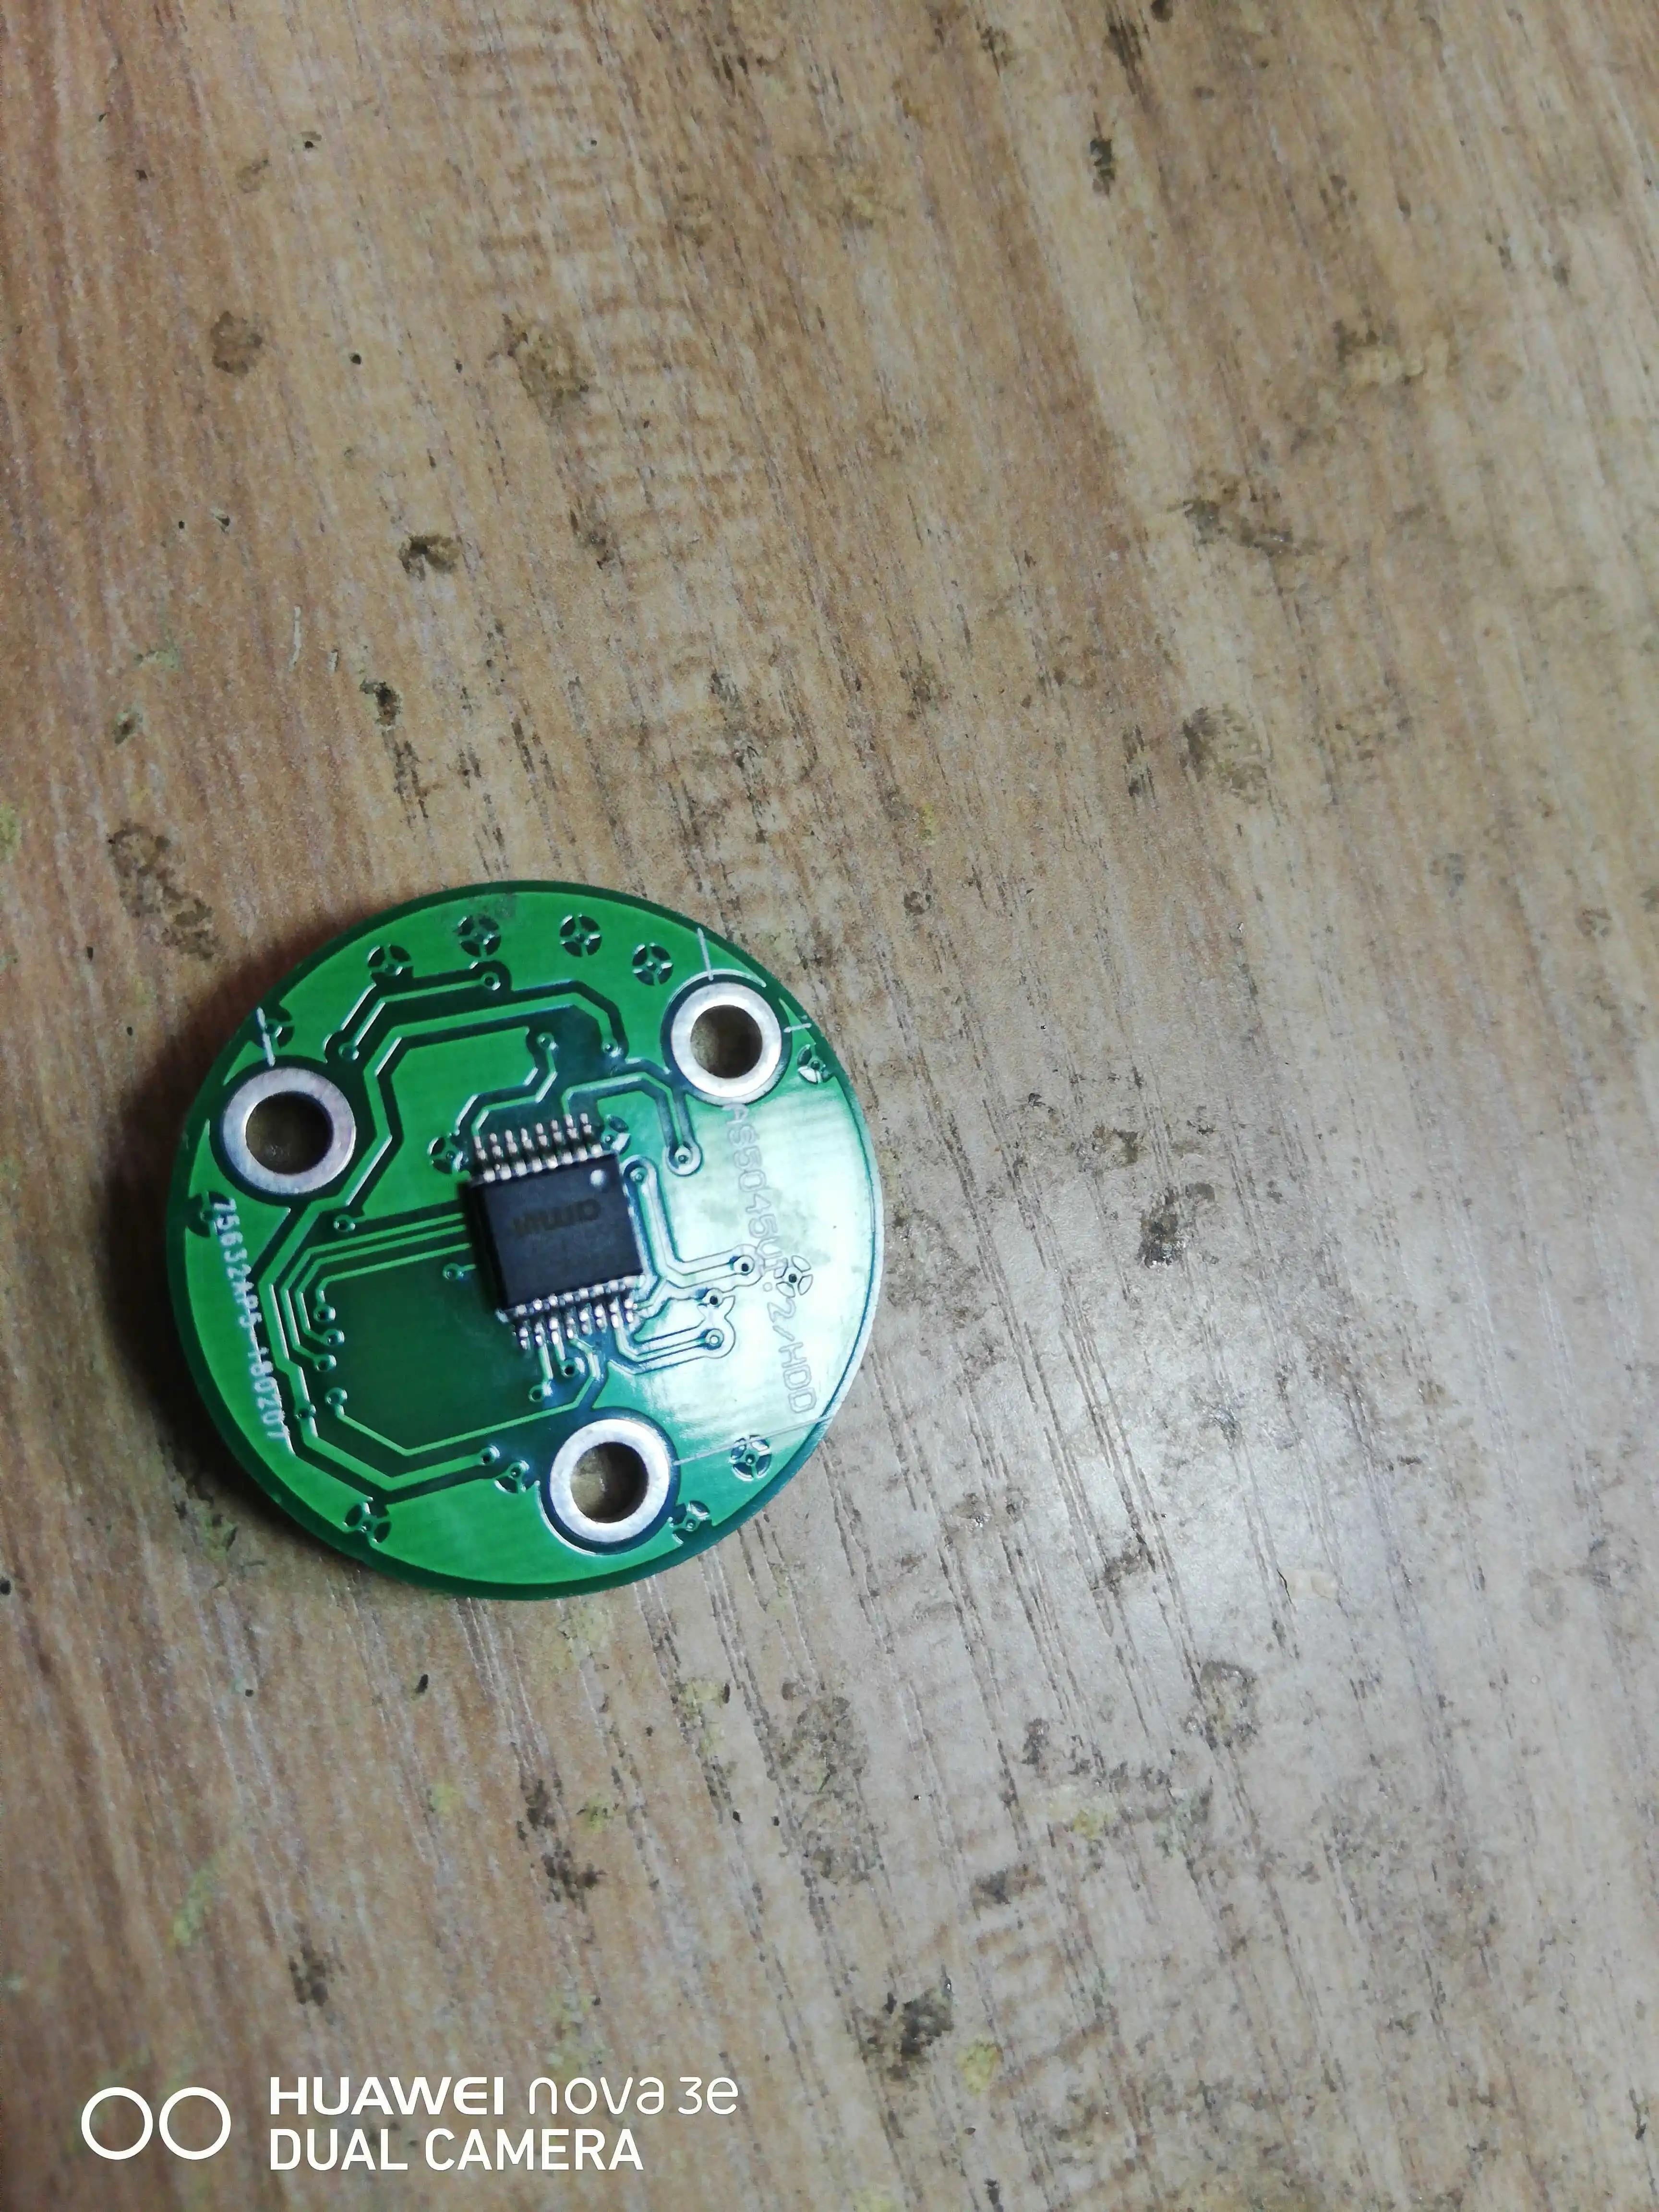 

Magnetic Encoder AS5045B Send STM32 and C51 Source Code to Send Magnet and Lead Thickness SSI and ABI Interface